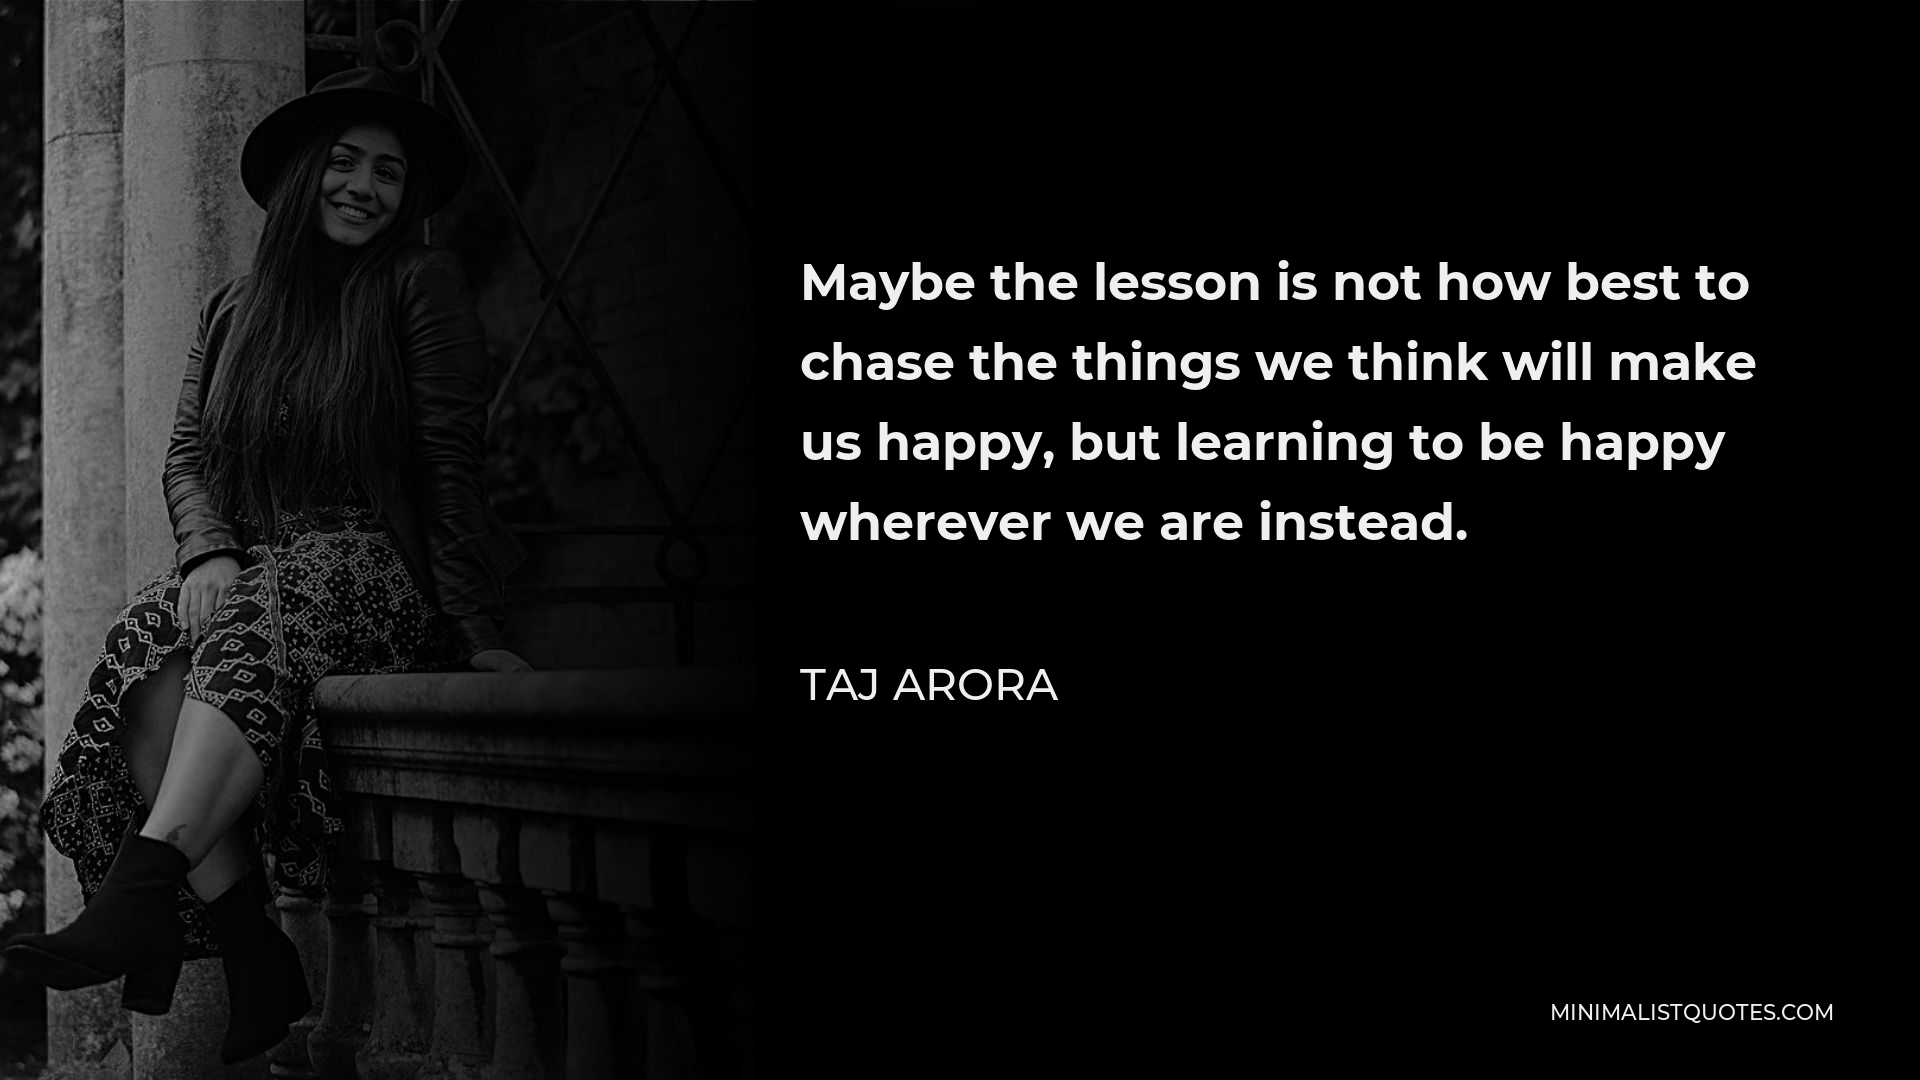 Taj Arora Quote - Maybe the lesson is not how best to chase the things we think will make us happy, but learning to be happy wherever we are instead.